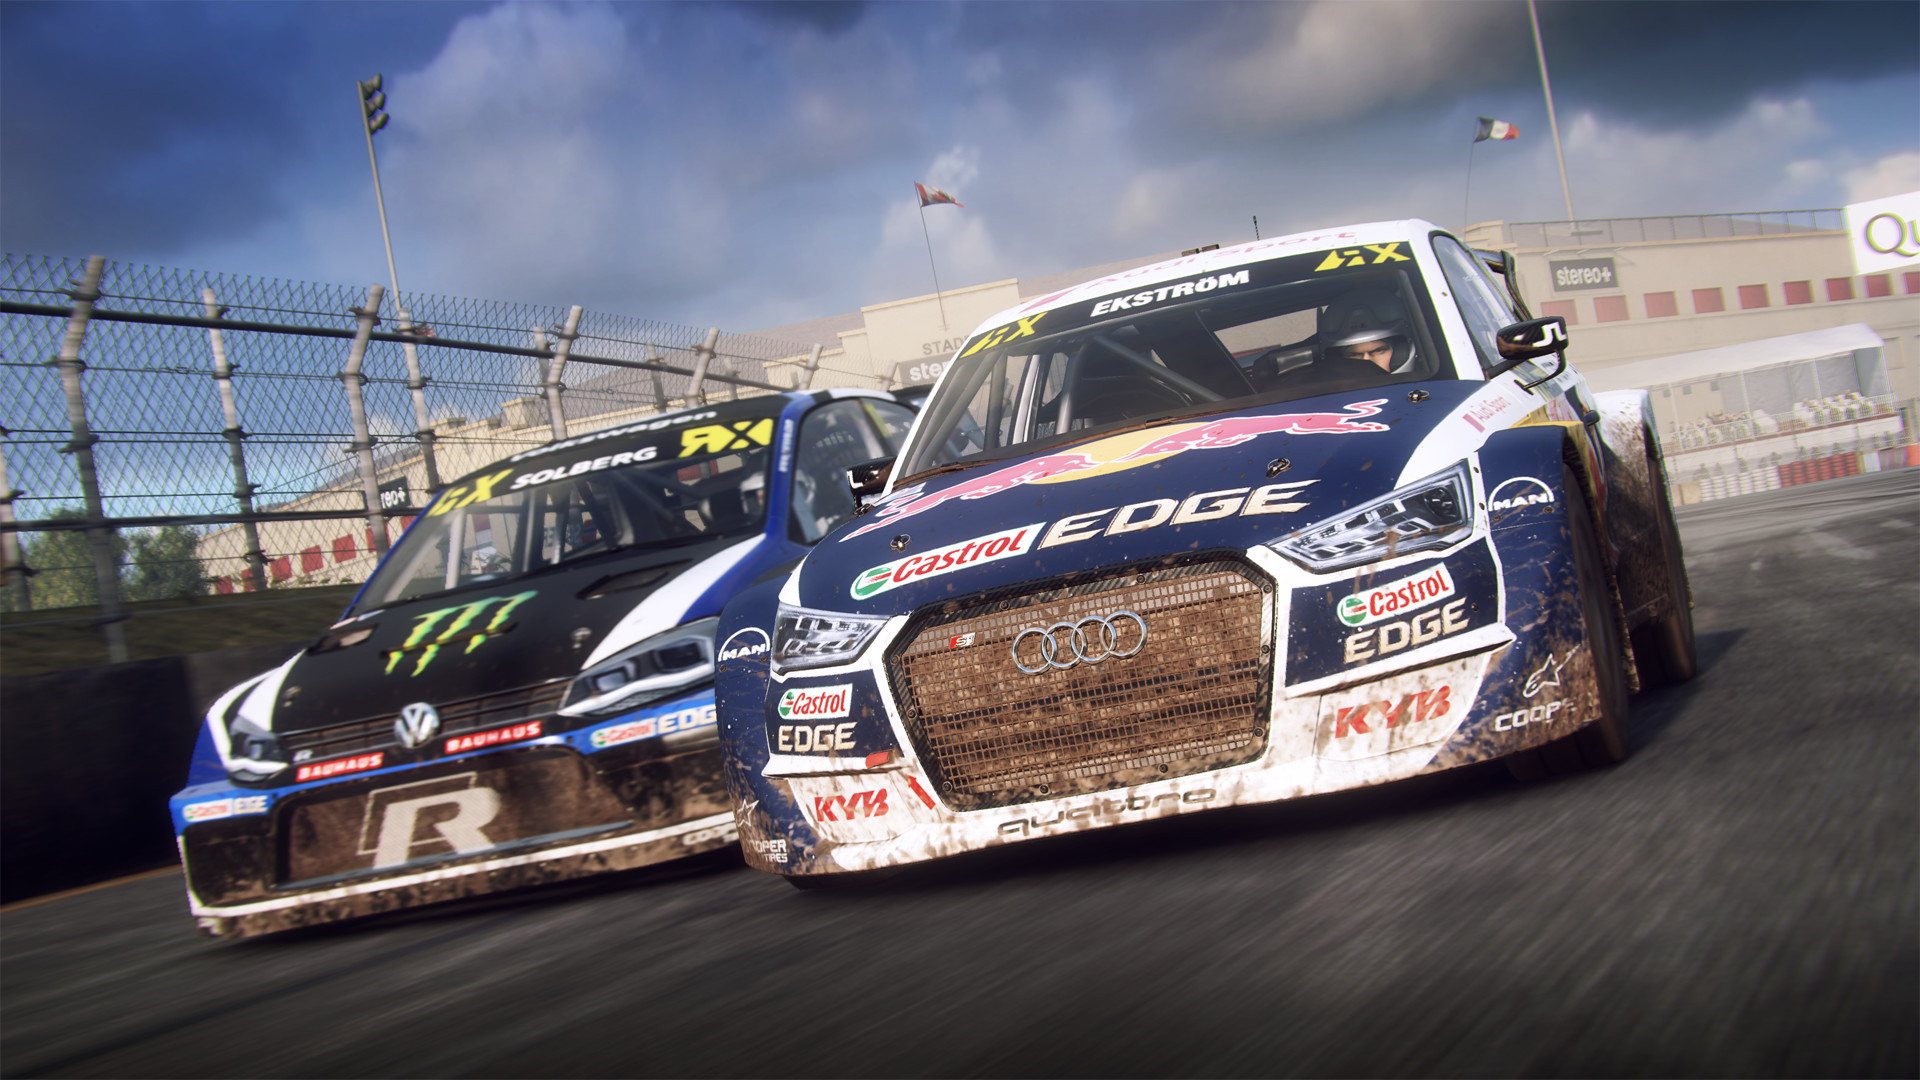 DiRT Rally 2.0 Game Of The Year Edition PlayStation 4 Account